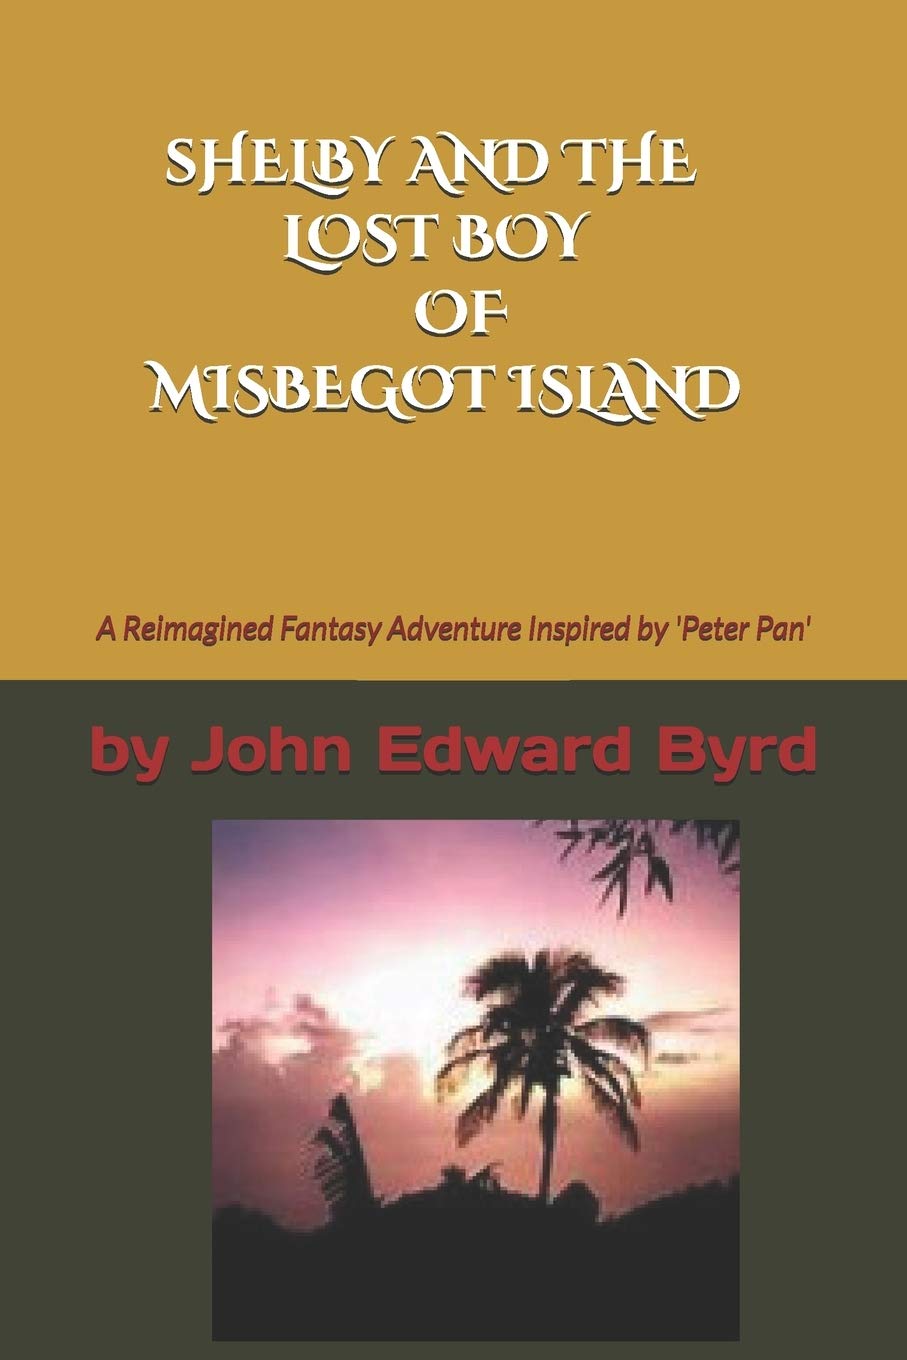 Shelby and the Lost Boy of Misbegot Island | Peter Pan Wiki | Fandom